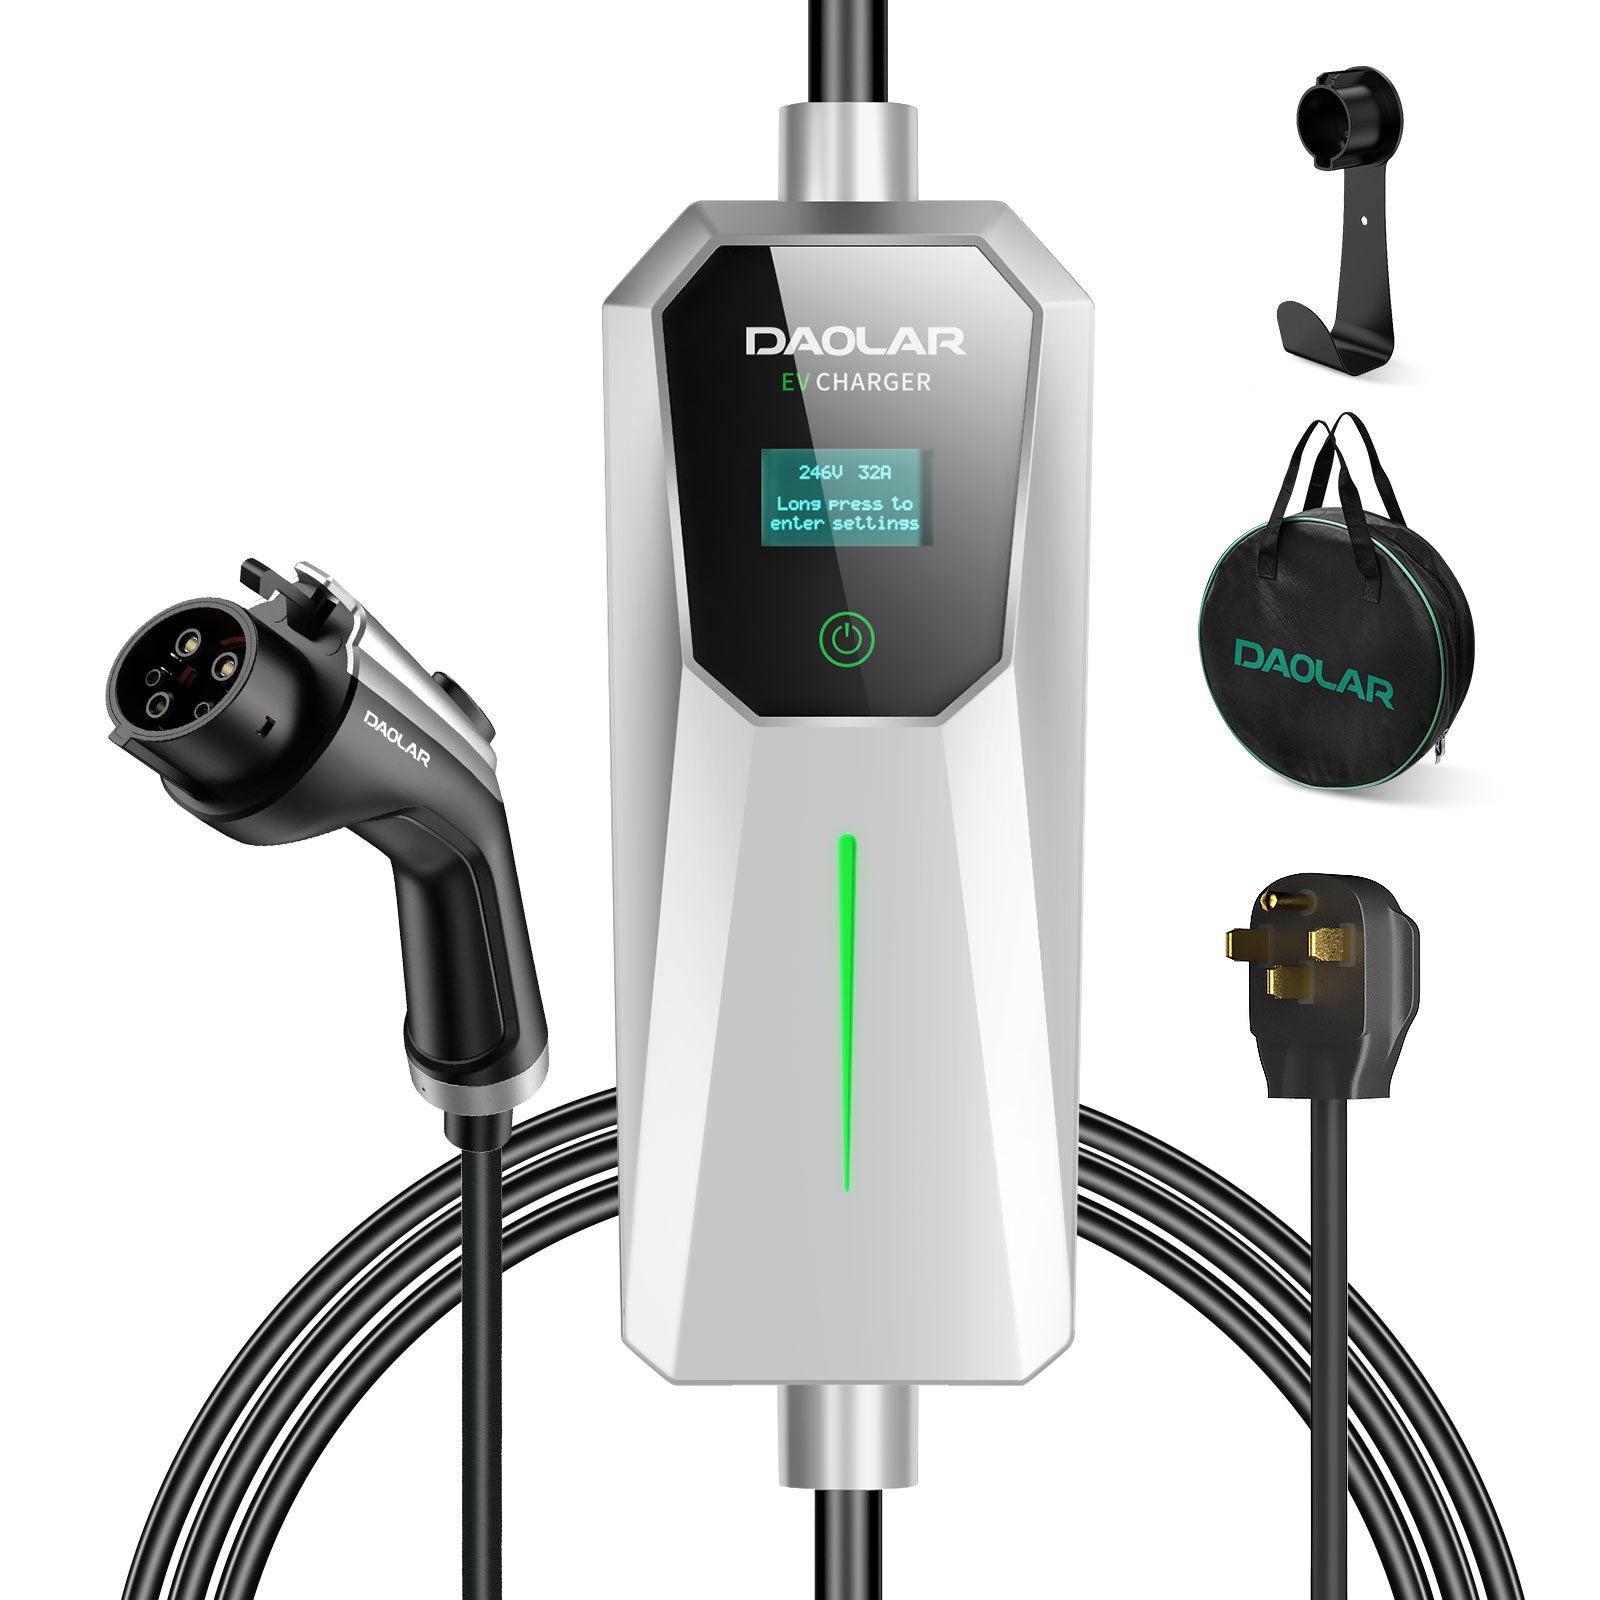 GEARZAAR EV Charger Level 2 16A Portable Electric Car Charger 20Ft Cable  100V-240V Timing Delay Function EVSE SAE J1772, Waterproof, Type 1 EV Home